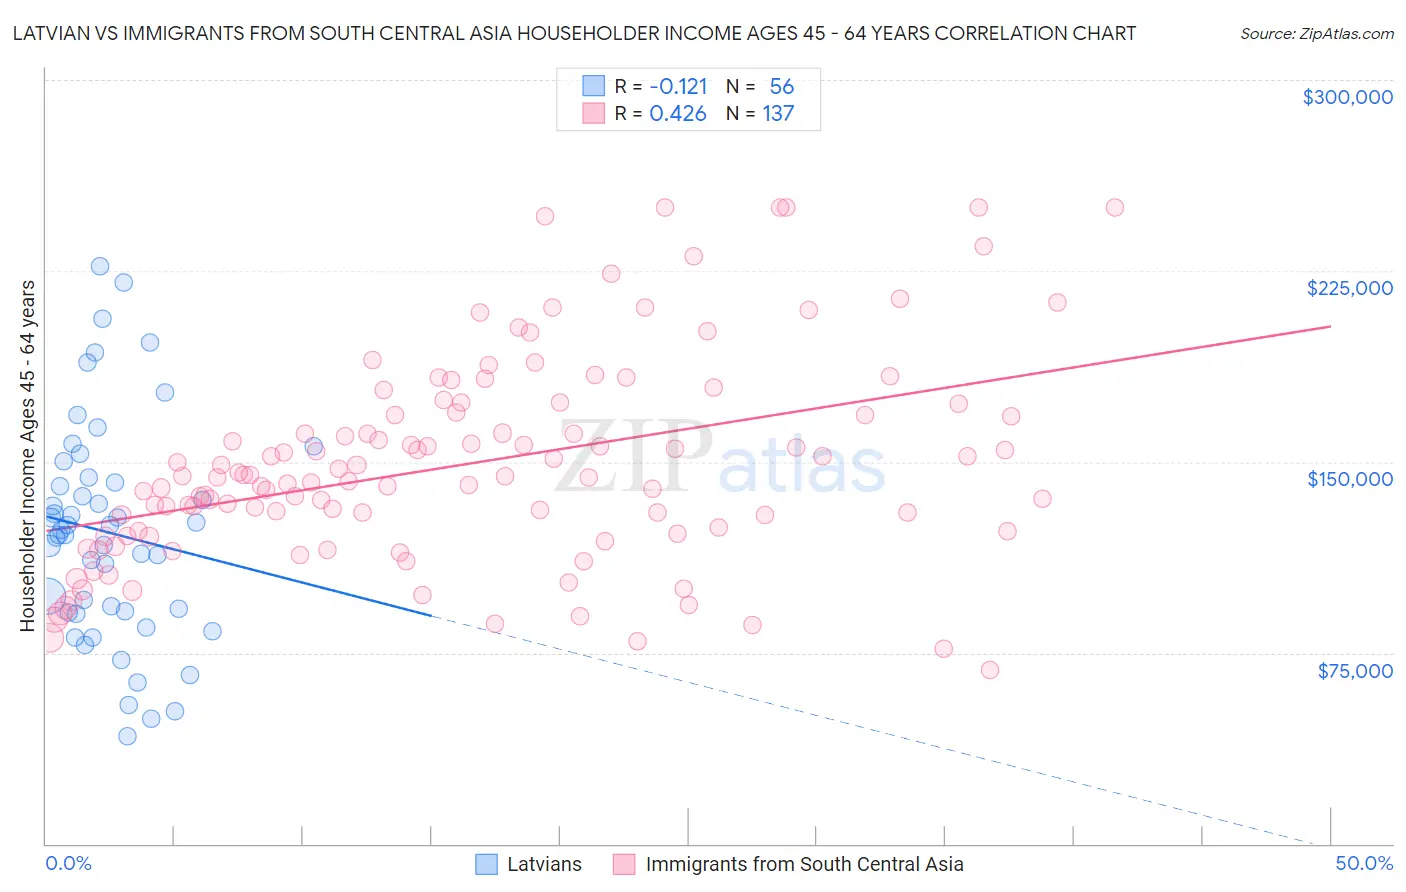 Latvian vs Immigrants from South Central Asia Householder Income Ages 45 - 64 years